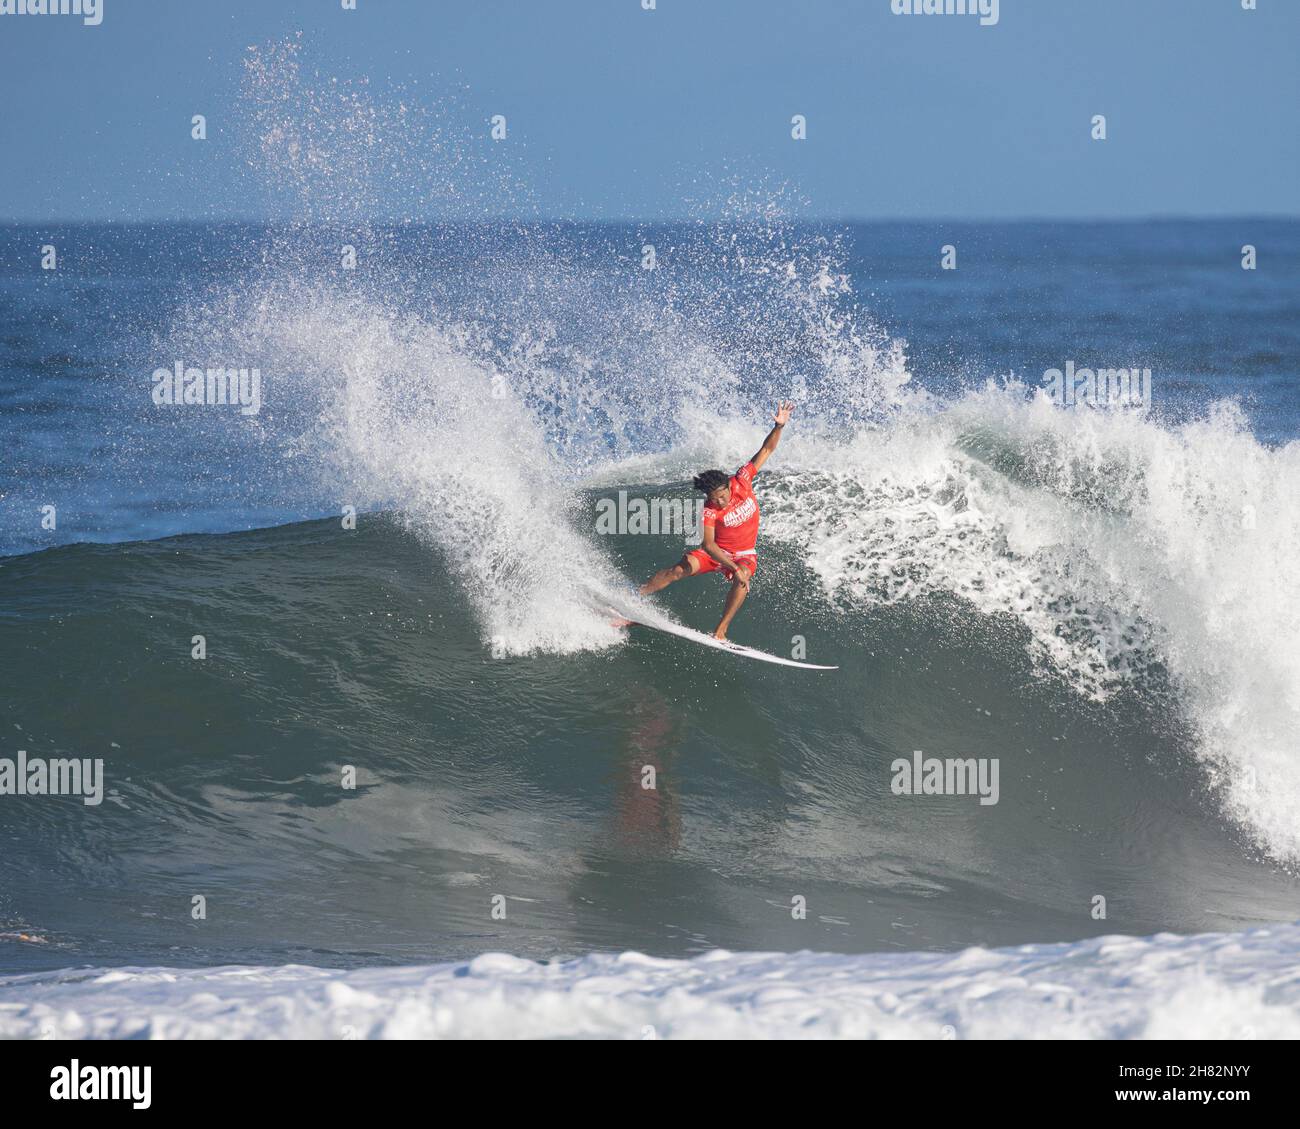 Haleiwa, Hawaii, USA. 26th Nov, 2021. - Rio Waida of Indonesia shows his style on this wave during the opening of the menÕs round 80 of the Michelob ULTRA Pure Gold Haleiwa Challenger at AliÕi Beach Park in Haleiwa, Hawaii. Glenn Yoza/CSM/Alamy Live News Stock Photo